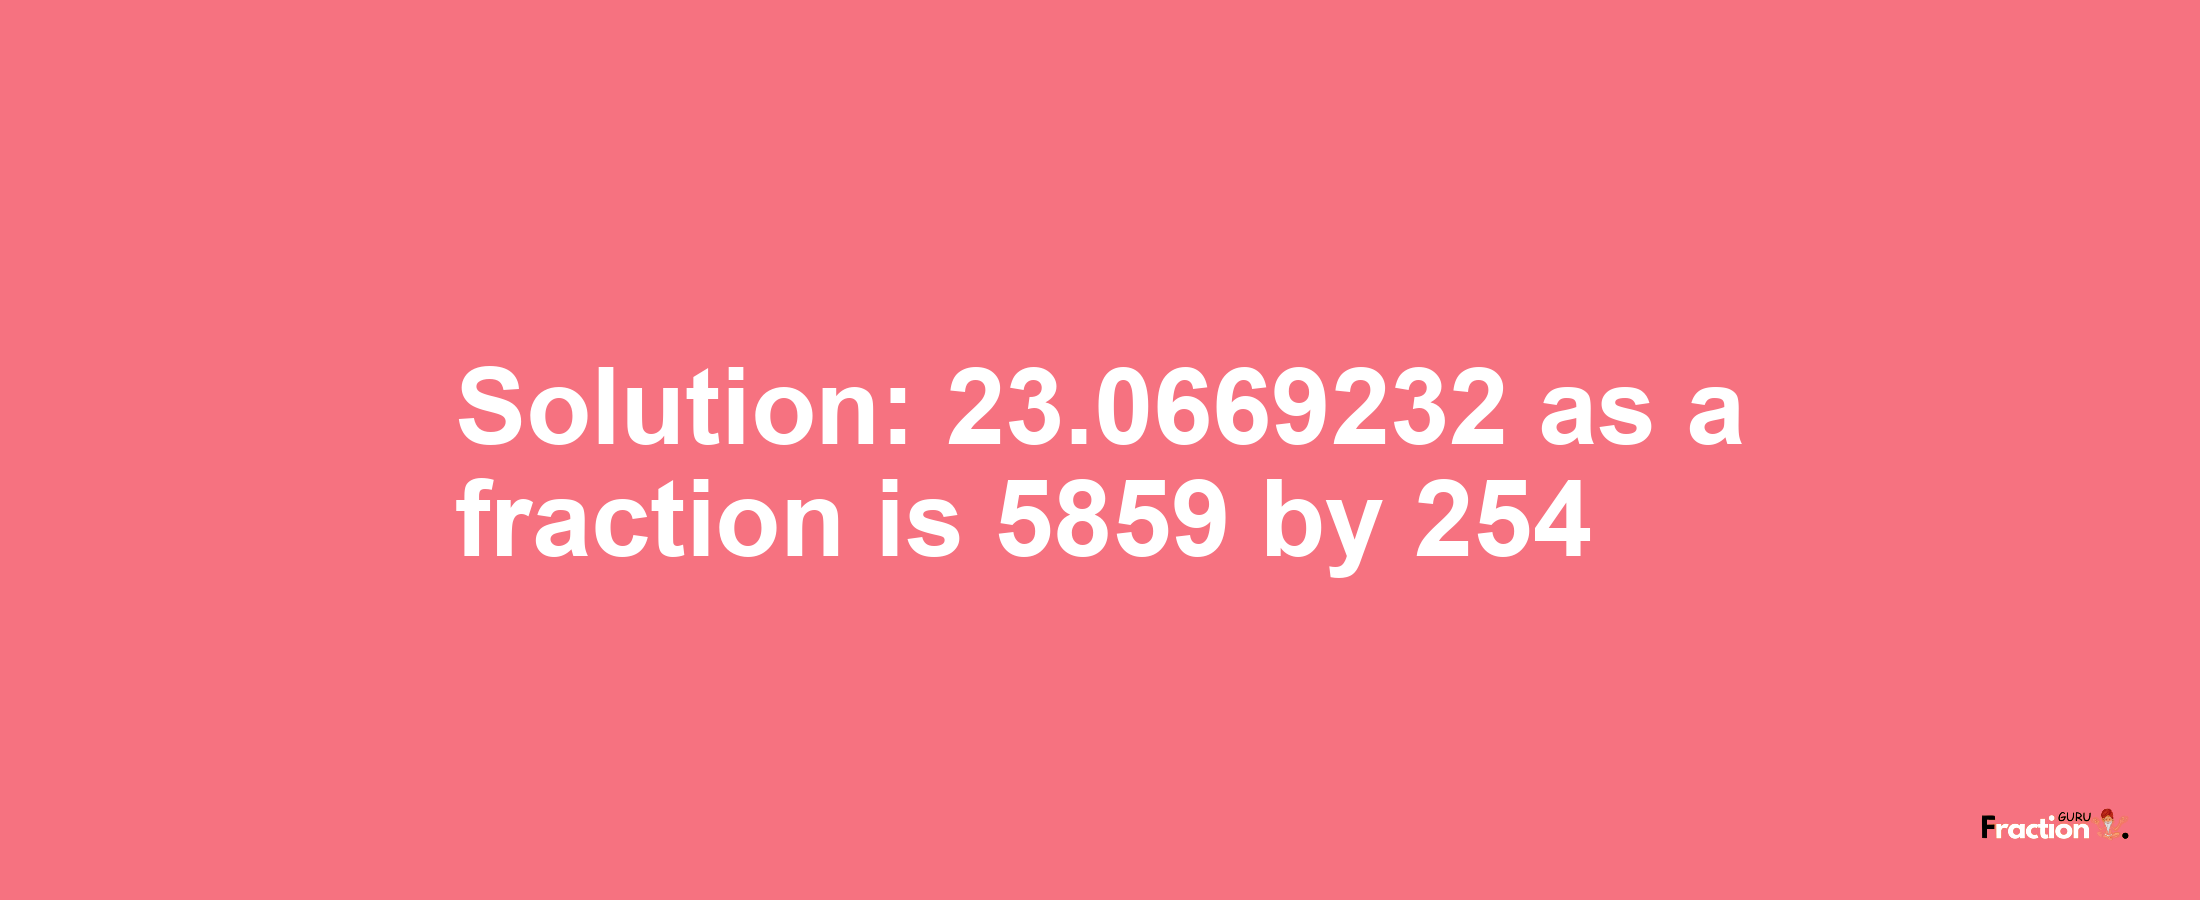 Solution:23.0669232 as a fraction is 5859/254